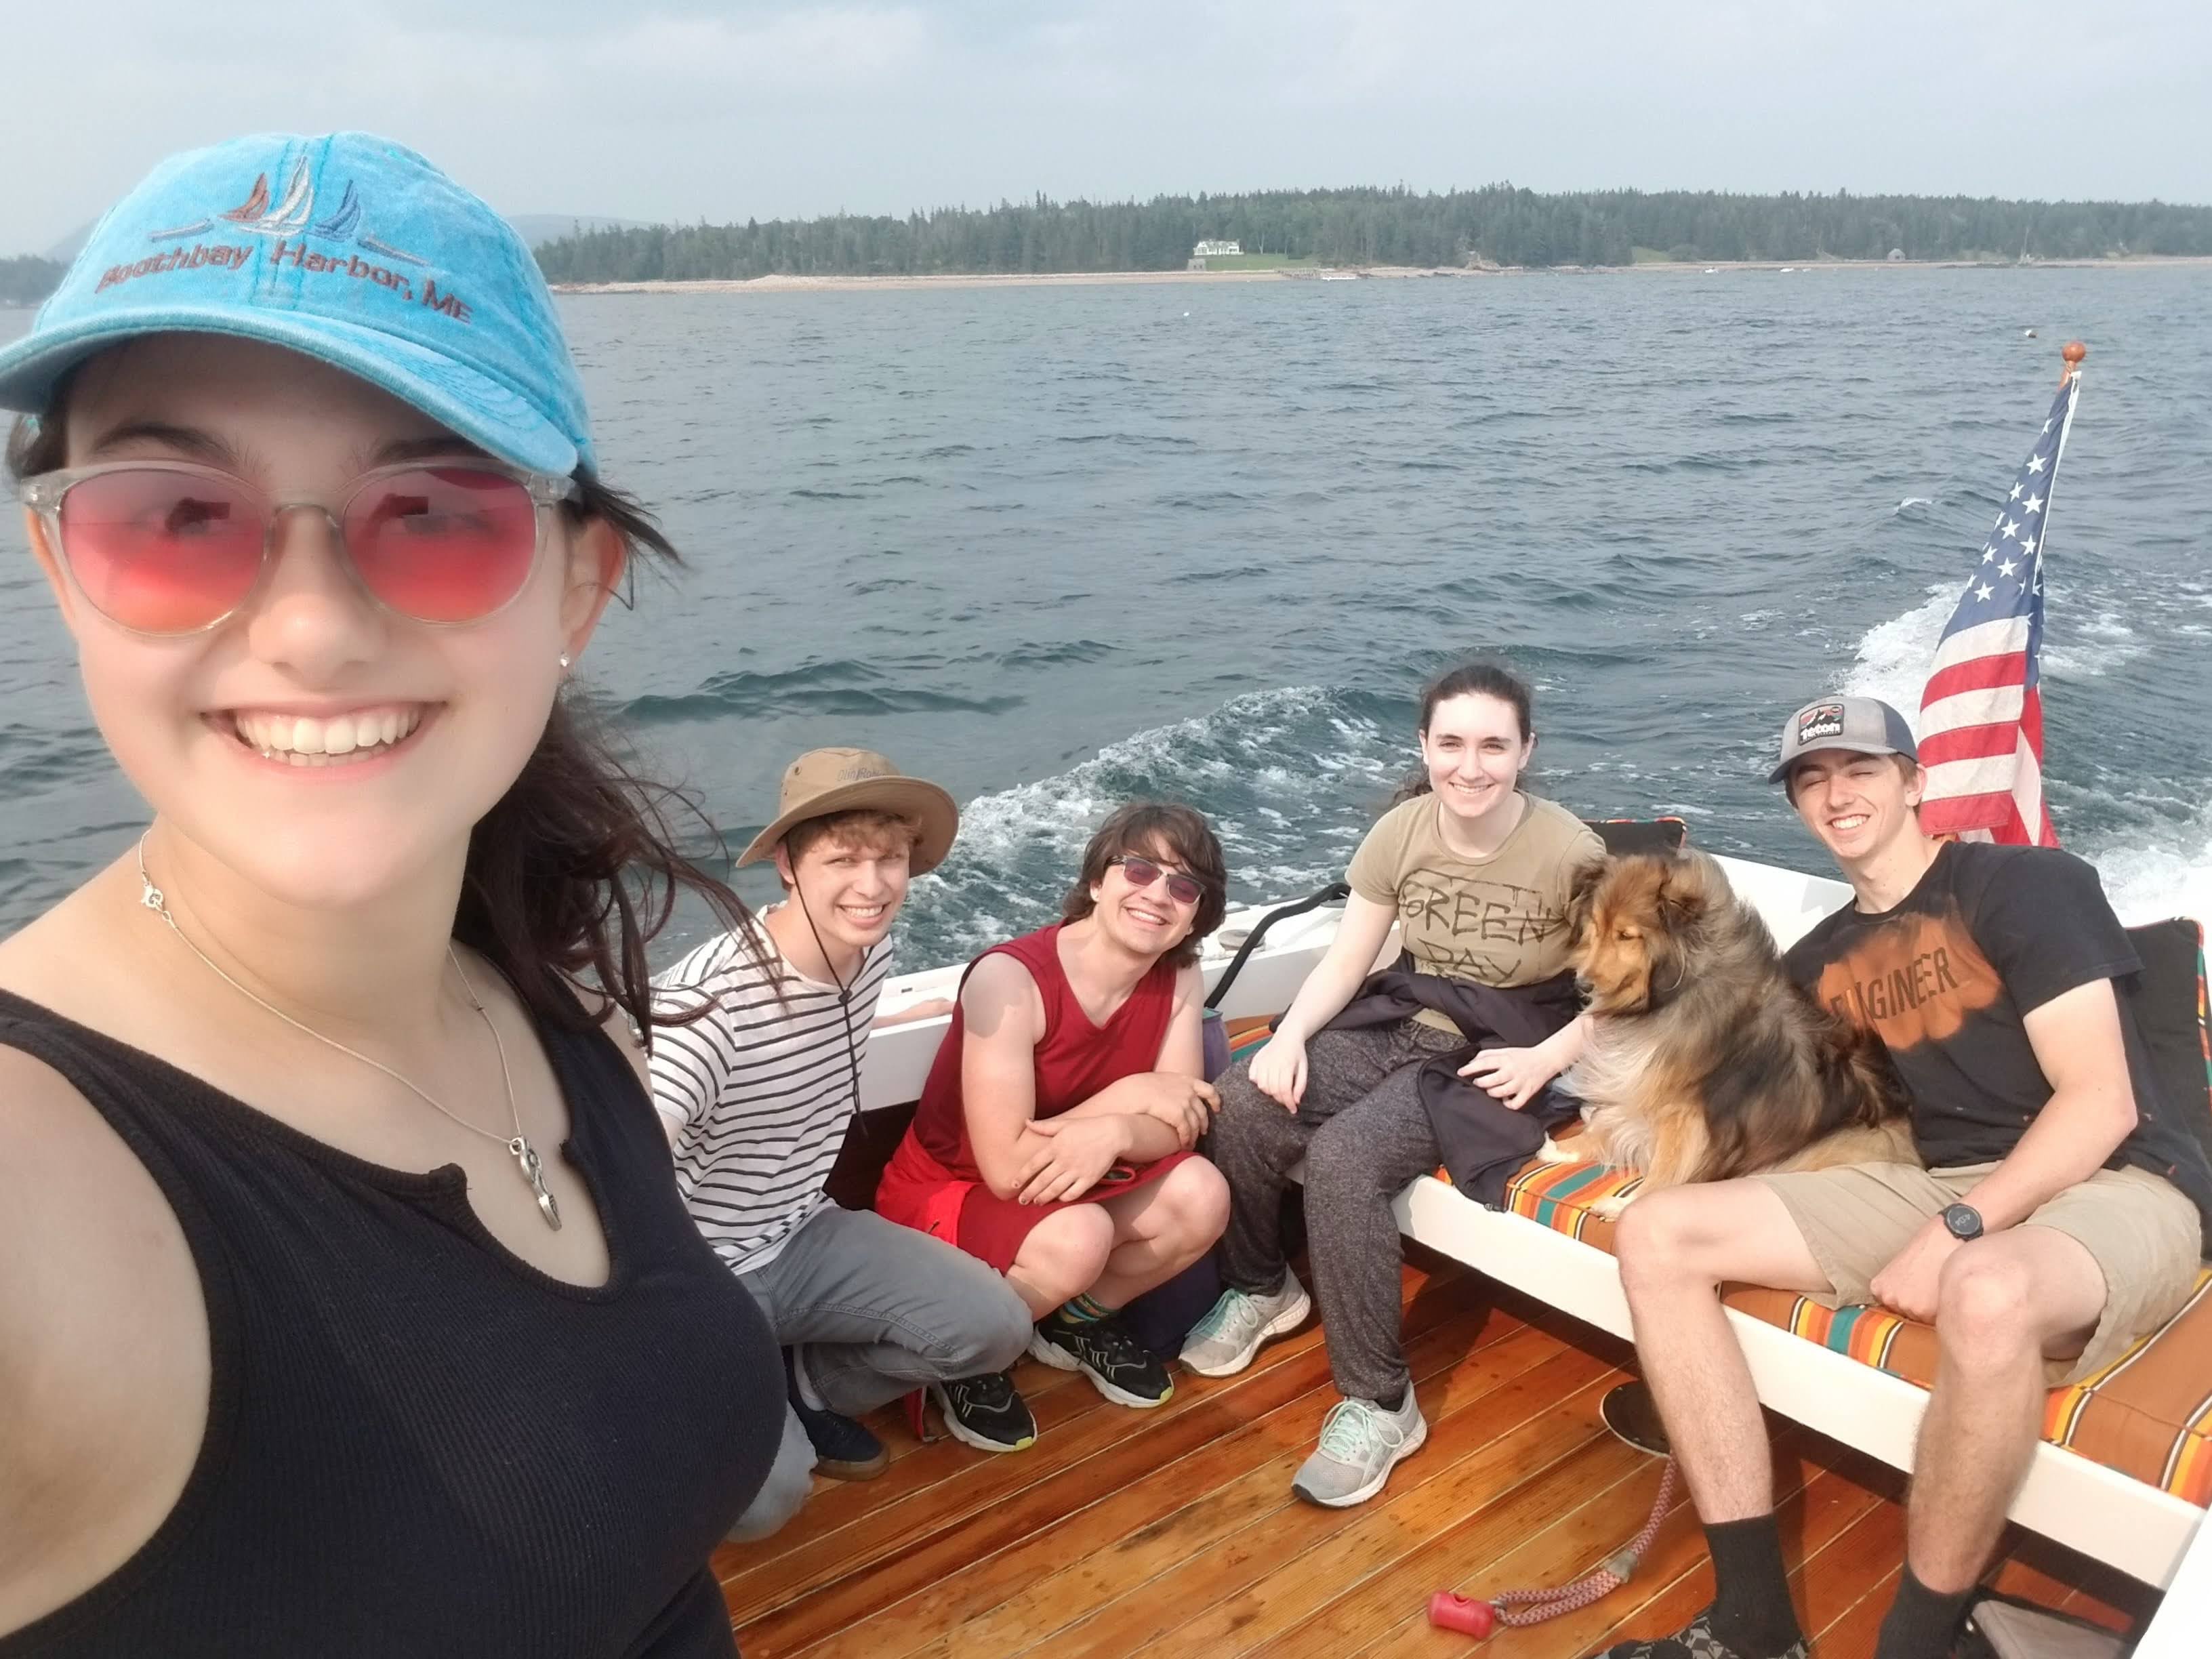 Sofia and her team on a boat in Maine